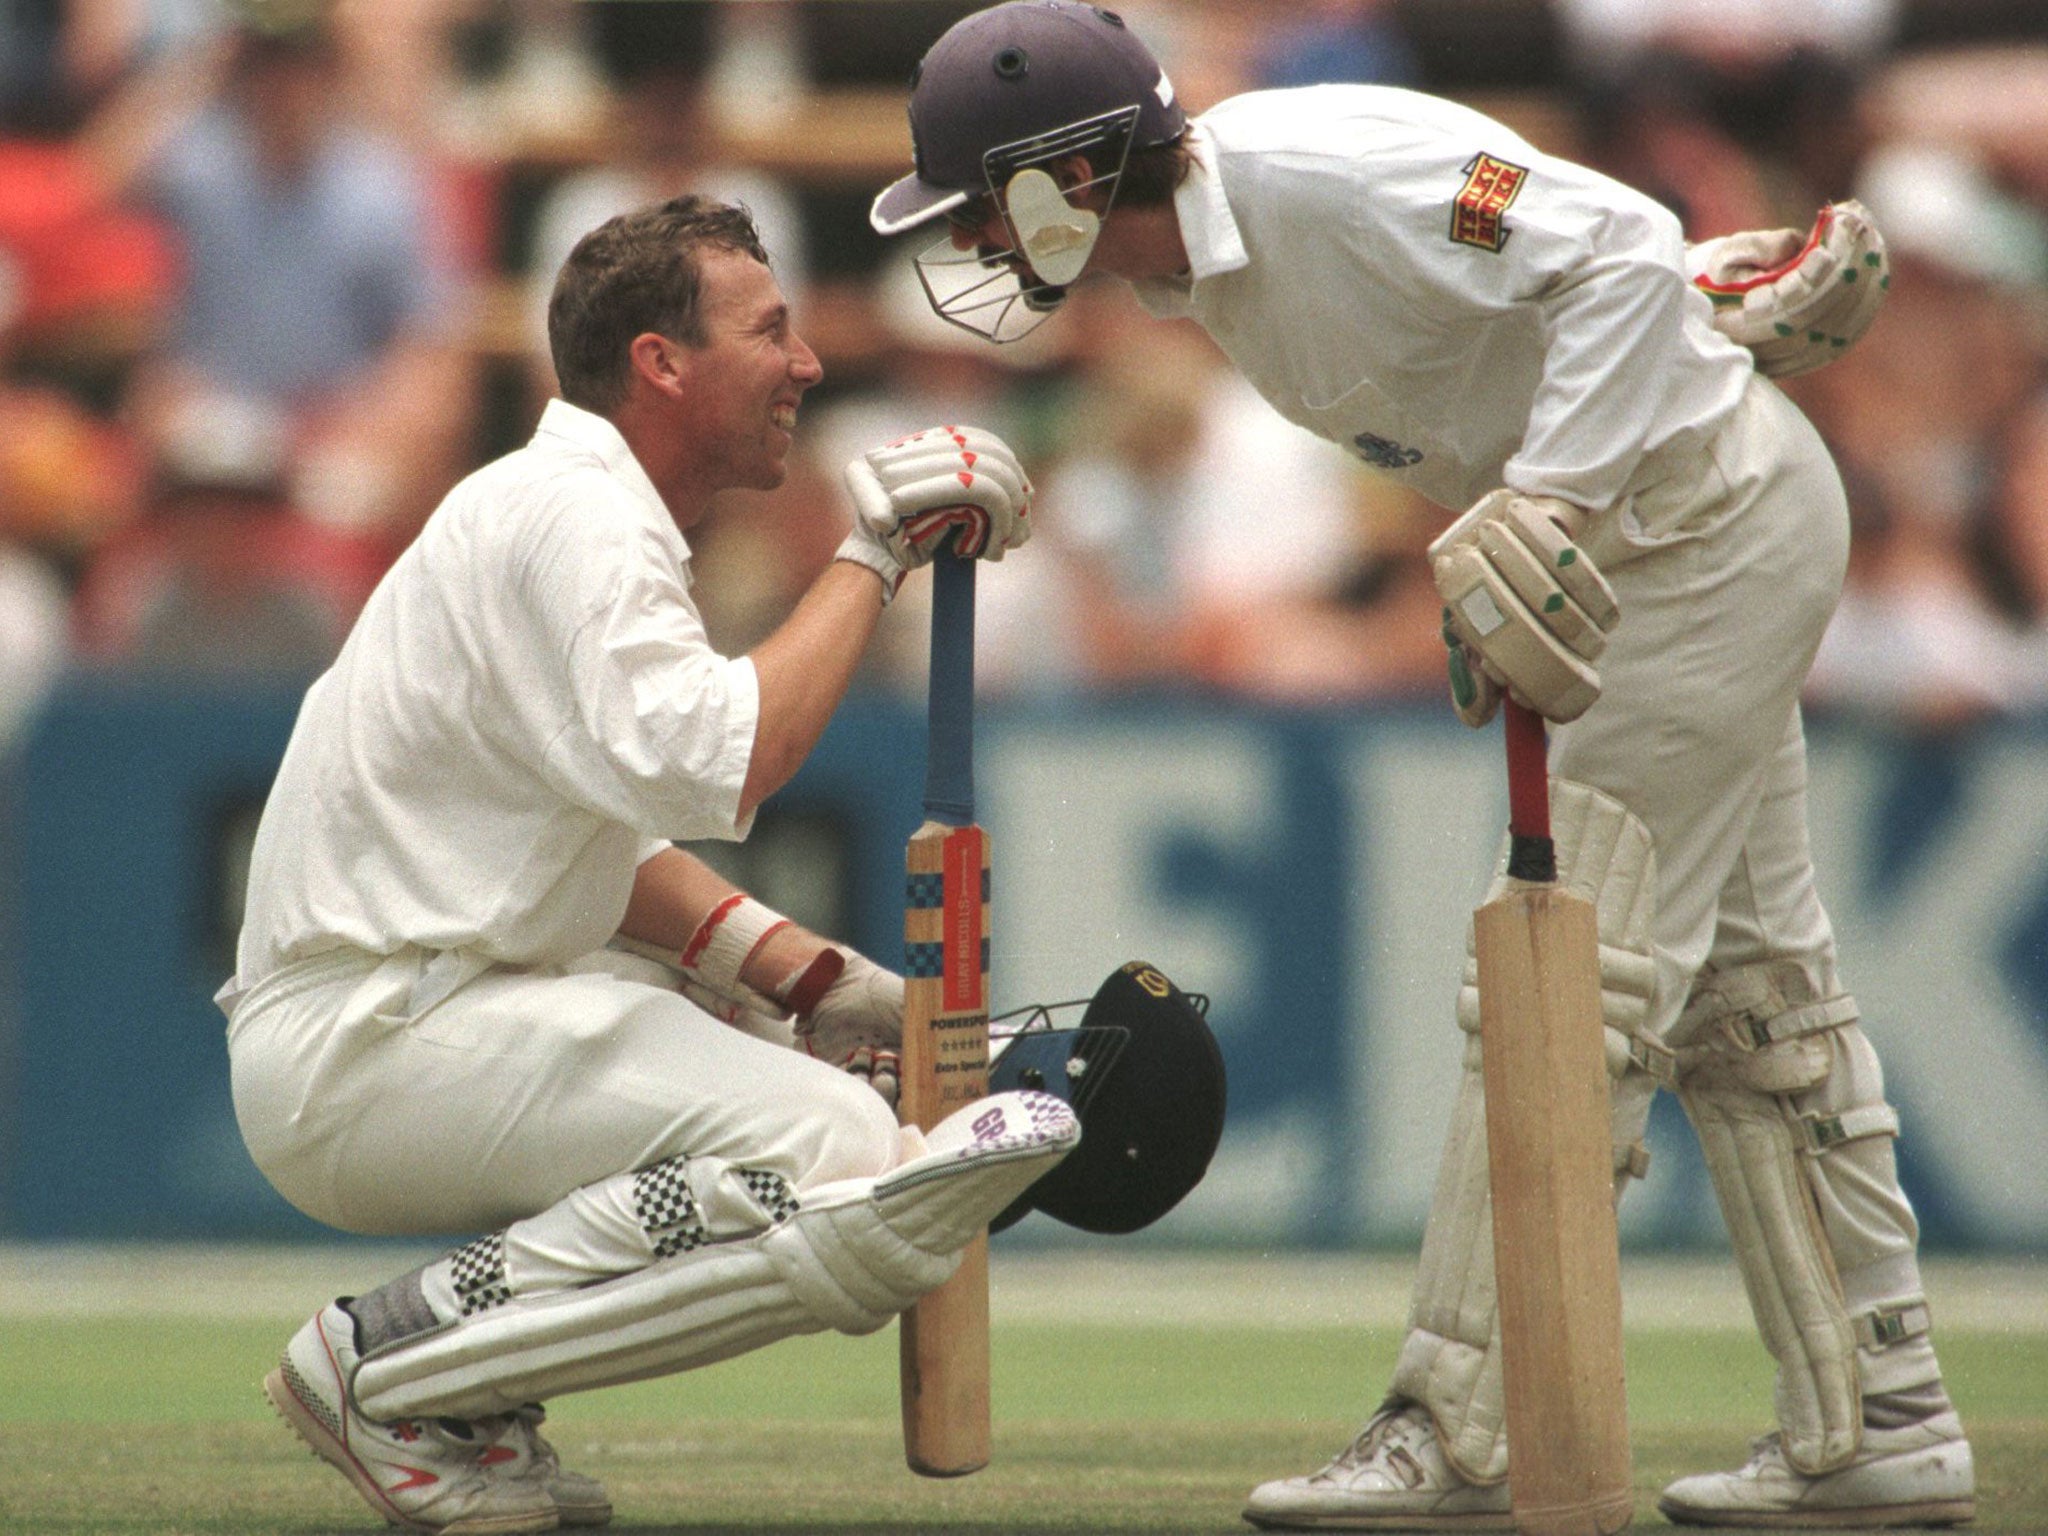 Atherton receives words of wisdom from batting partner Jack Russell after being hit by the ball at the same venue in 1995